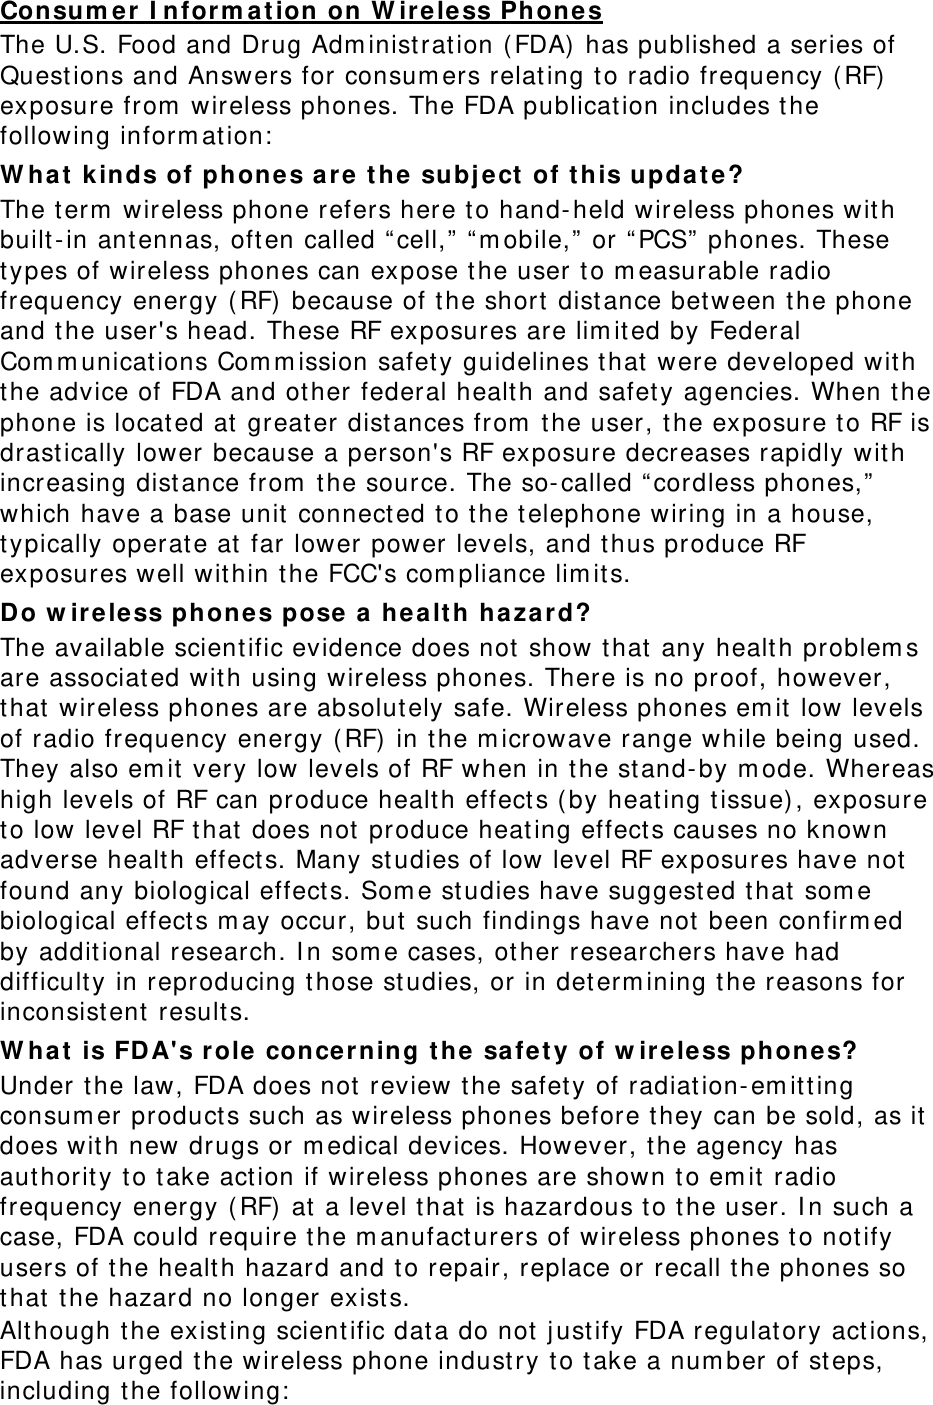 Consum er I nform ation on W ir ele ss Phones The U.S. Food and Drug Adm inist ration (FDA) has published a series of Questions and Answers for consum ers relating to radio frequency (RF)  exposure from  wireless phones. The FDA publication includes t he following inform at ion:  W hat kinds of phone s are  t he subj ect  of t his update? The t erm  wireless phone refers here t o hand- held wireless phones with built-in ant ennas, often called “ cell,”  “ m obile,”  or “ PCS”  phones. These types of wireless phones can expose t he user t o m easurable radio frequency energy ( RF)  because of t he short dist ance bet ween the phone and the user&apos;s head. These RF exposures are lim ited by Federal Com m unications Com m ission safety guidelines t hat  were developed with the advice of FDA and ot her federal healt h and safet y agencies. When t he phone is located at greater dist ances from  t he user, the exposure t o RF is drast ically lower because a person&apos;s RF exposure decreases rapidly with increasing distance from  the source. The so- called “ cordless phones,”  which have a base unit connect ed t o the telephone wiring in a house, typically operate at far lower power levels, and t hus produce RF exposures well wit hin the FCC&apos;s com pliance lim its. Do w ir ele ss ph ones pose a h ea lt h hazar d? The available scient ific evidence does not  show t hat any health problem s are associated wit h using wireless phones. There is no proof, however, that wireless phones are absolutely safe. Wireless phones em it low levels of radio frequency energy ( RF)  in t he m icrowave range while being used. They also em it very low levels of RF when in the st and- by m ode. Whereas high levels of RF can produce health effect s ( by heat ing tissue), exposure to low level RF that  does not  produce heating effect s causes no known adverse healt h effect s. Many studies of low level RF exposures have not found any biological effect s. Som e studies have suggest ed that  som e biological effect s m ay occur, but  such findings have not been confirm ed by additional research. I n som e cases, other researchers have had difficulty in reproducing t hose studies, or in det erm ining t he reasons for inconsist ent  results. W hat is FD A&apos;s role  concer ning t he  sa fet y of w ireless phone s? Under the law, FDA does not review the safet y of radiation- em itting consum er product s such as wireless phones before they can be sold, as it  does wit h new drugs or m edical devices. However, t he agency has aut hority to take act ion if wireless phones are shown t o em it  radio frequency energy ( RF)  at  a level that  is hazardous t o t he user. I n such a case, FDA could require the m anufact urers of w ireless phones to not ify users of t he health hazard and to repair, replace or recall t he phones so that the hazard no longer exist s. Alt hough t he exist ing scientific data do not j ust ify FDA regulatory act ions, FDA has urged t he wireless phone industry to take a num ber of st eps, including the following:  